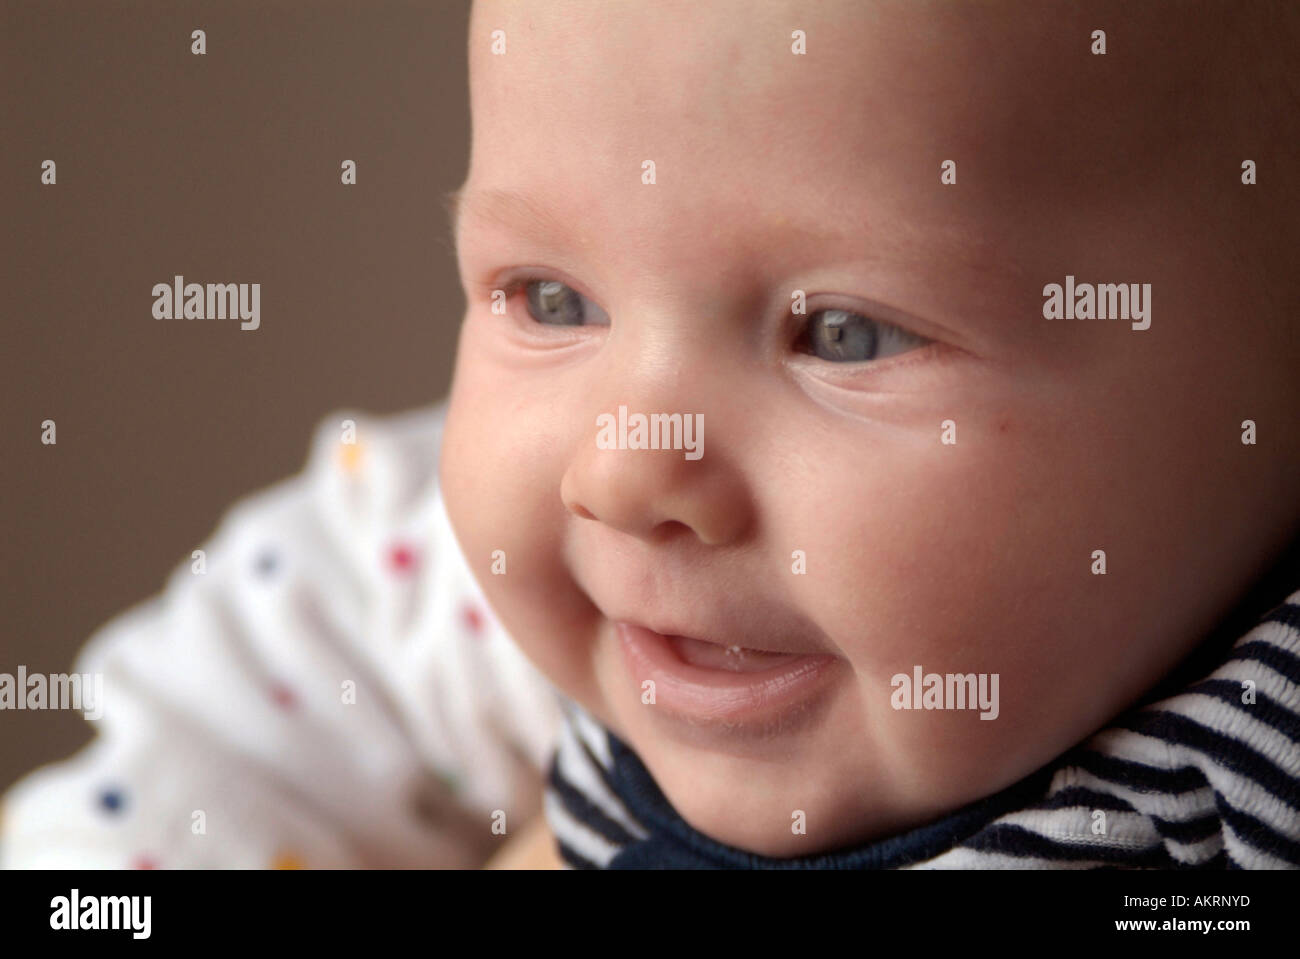 portrait of a baby of 6 months laughing Stock Photo